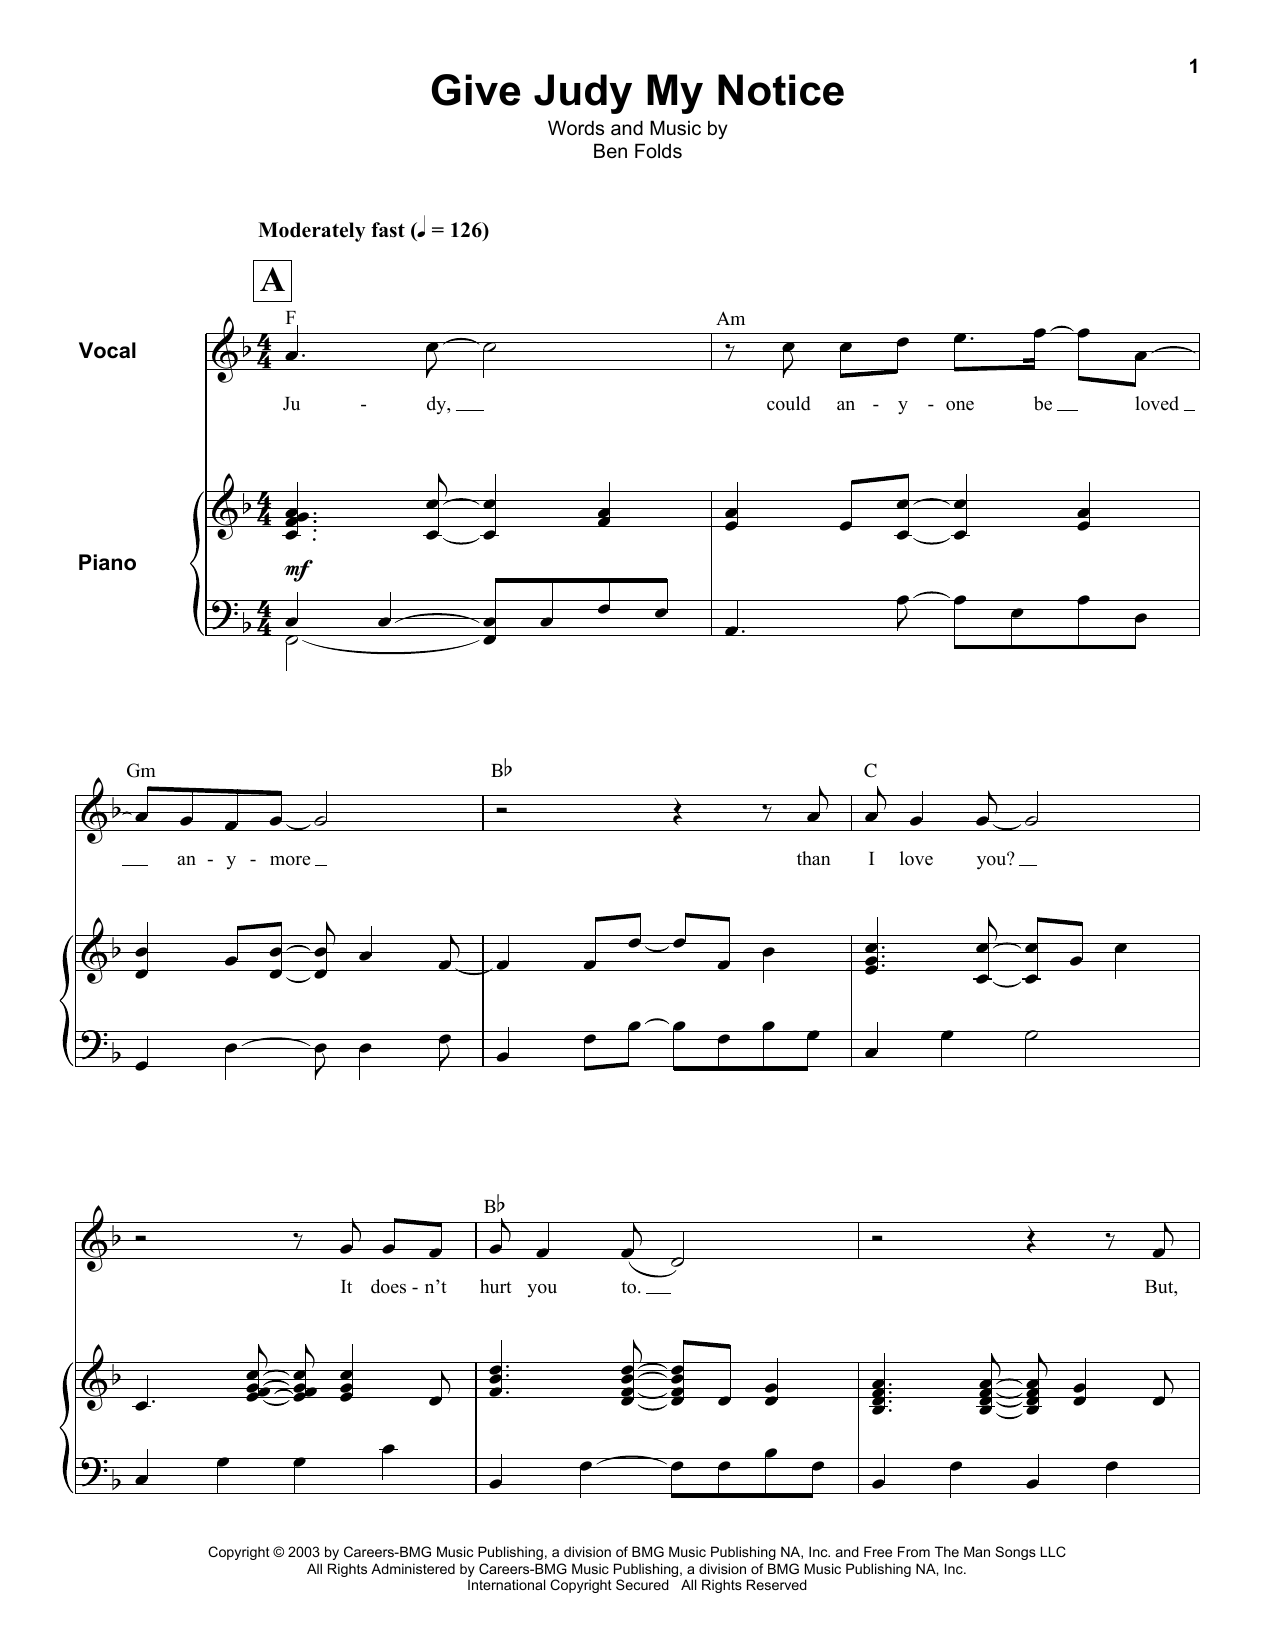 Download Ben Folds Give Judy My Notice Sheet Music